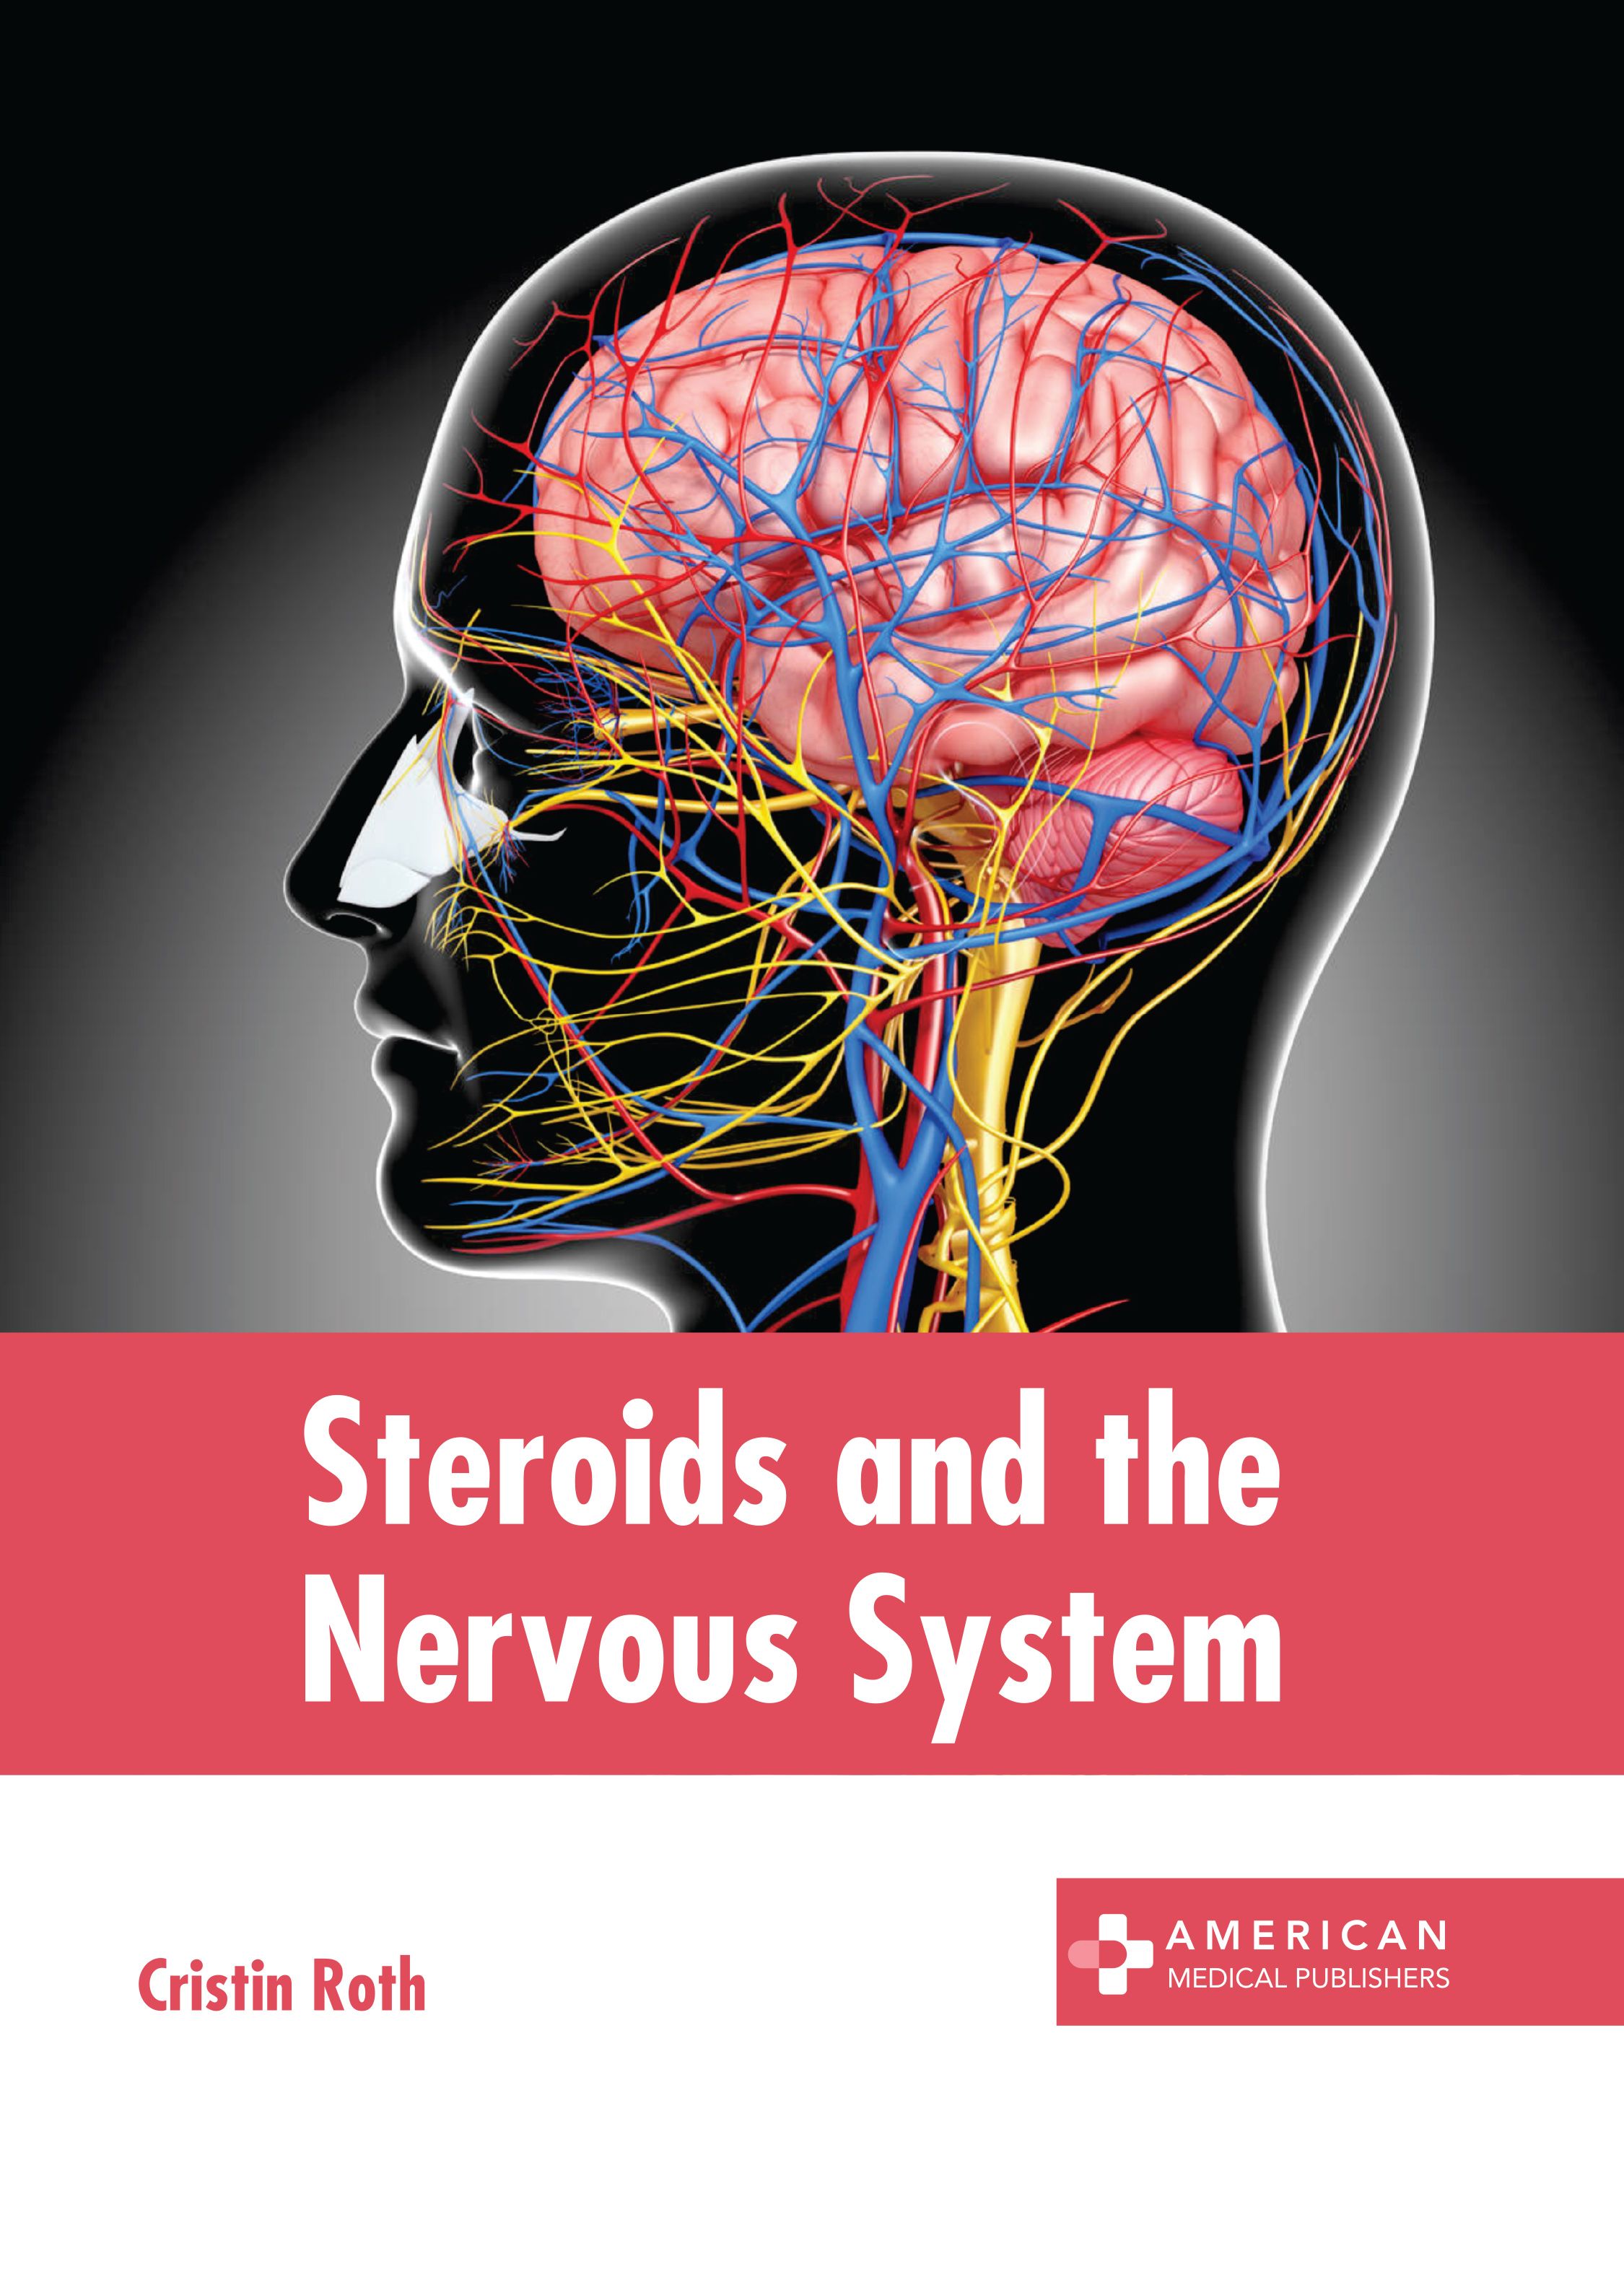 STEROIDS AND THE NERVOUS SYSTEM